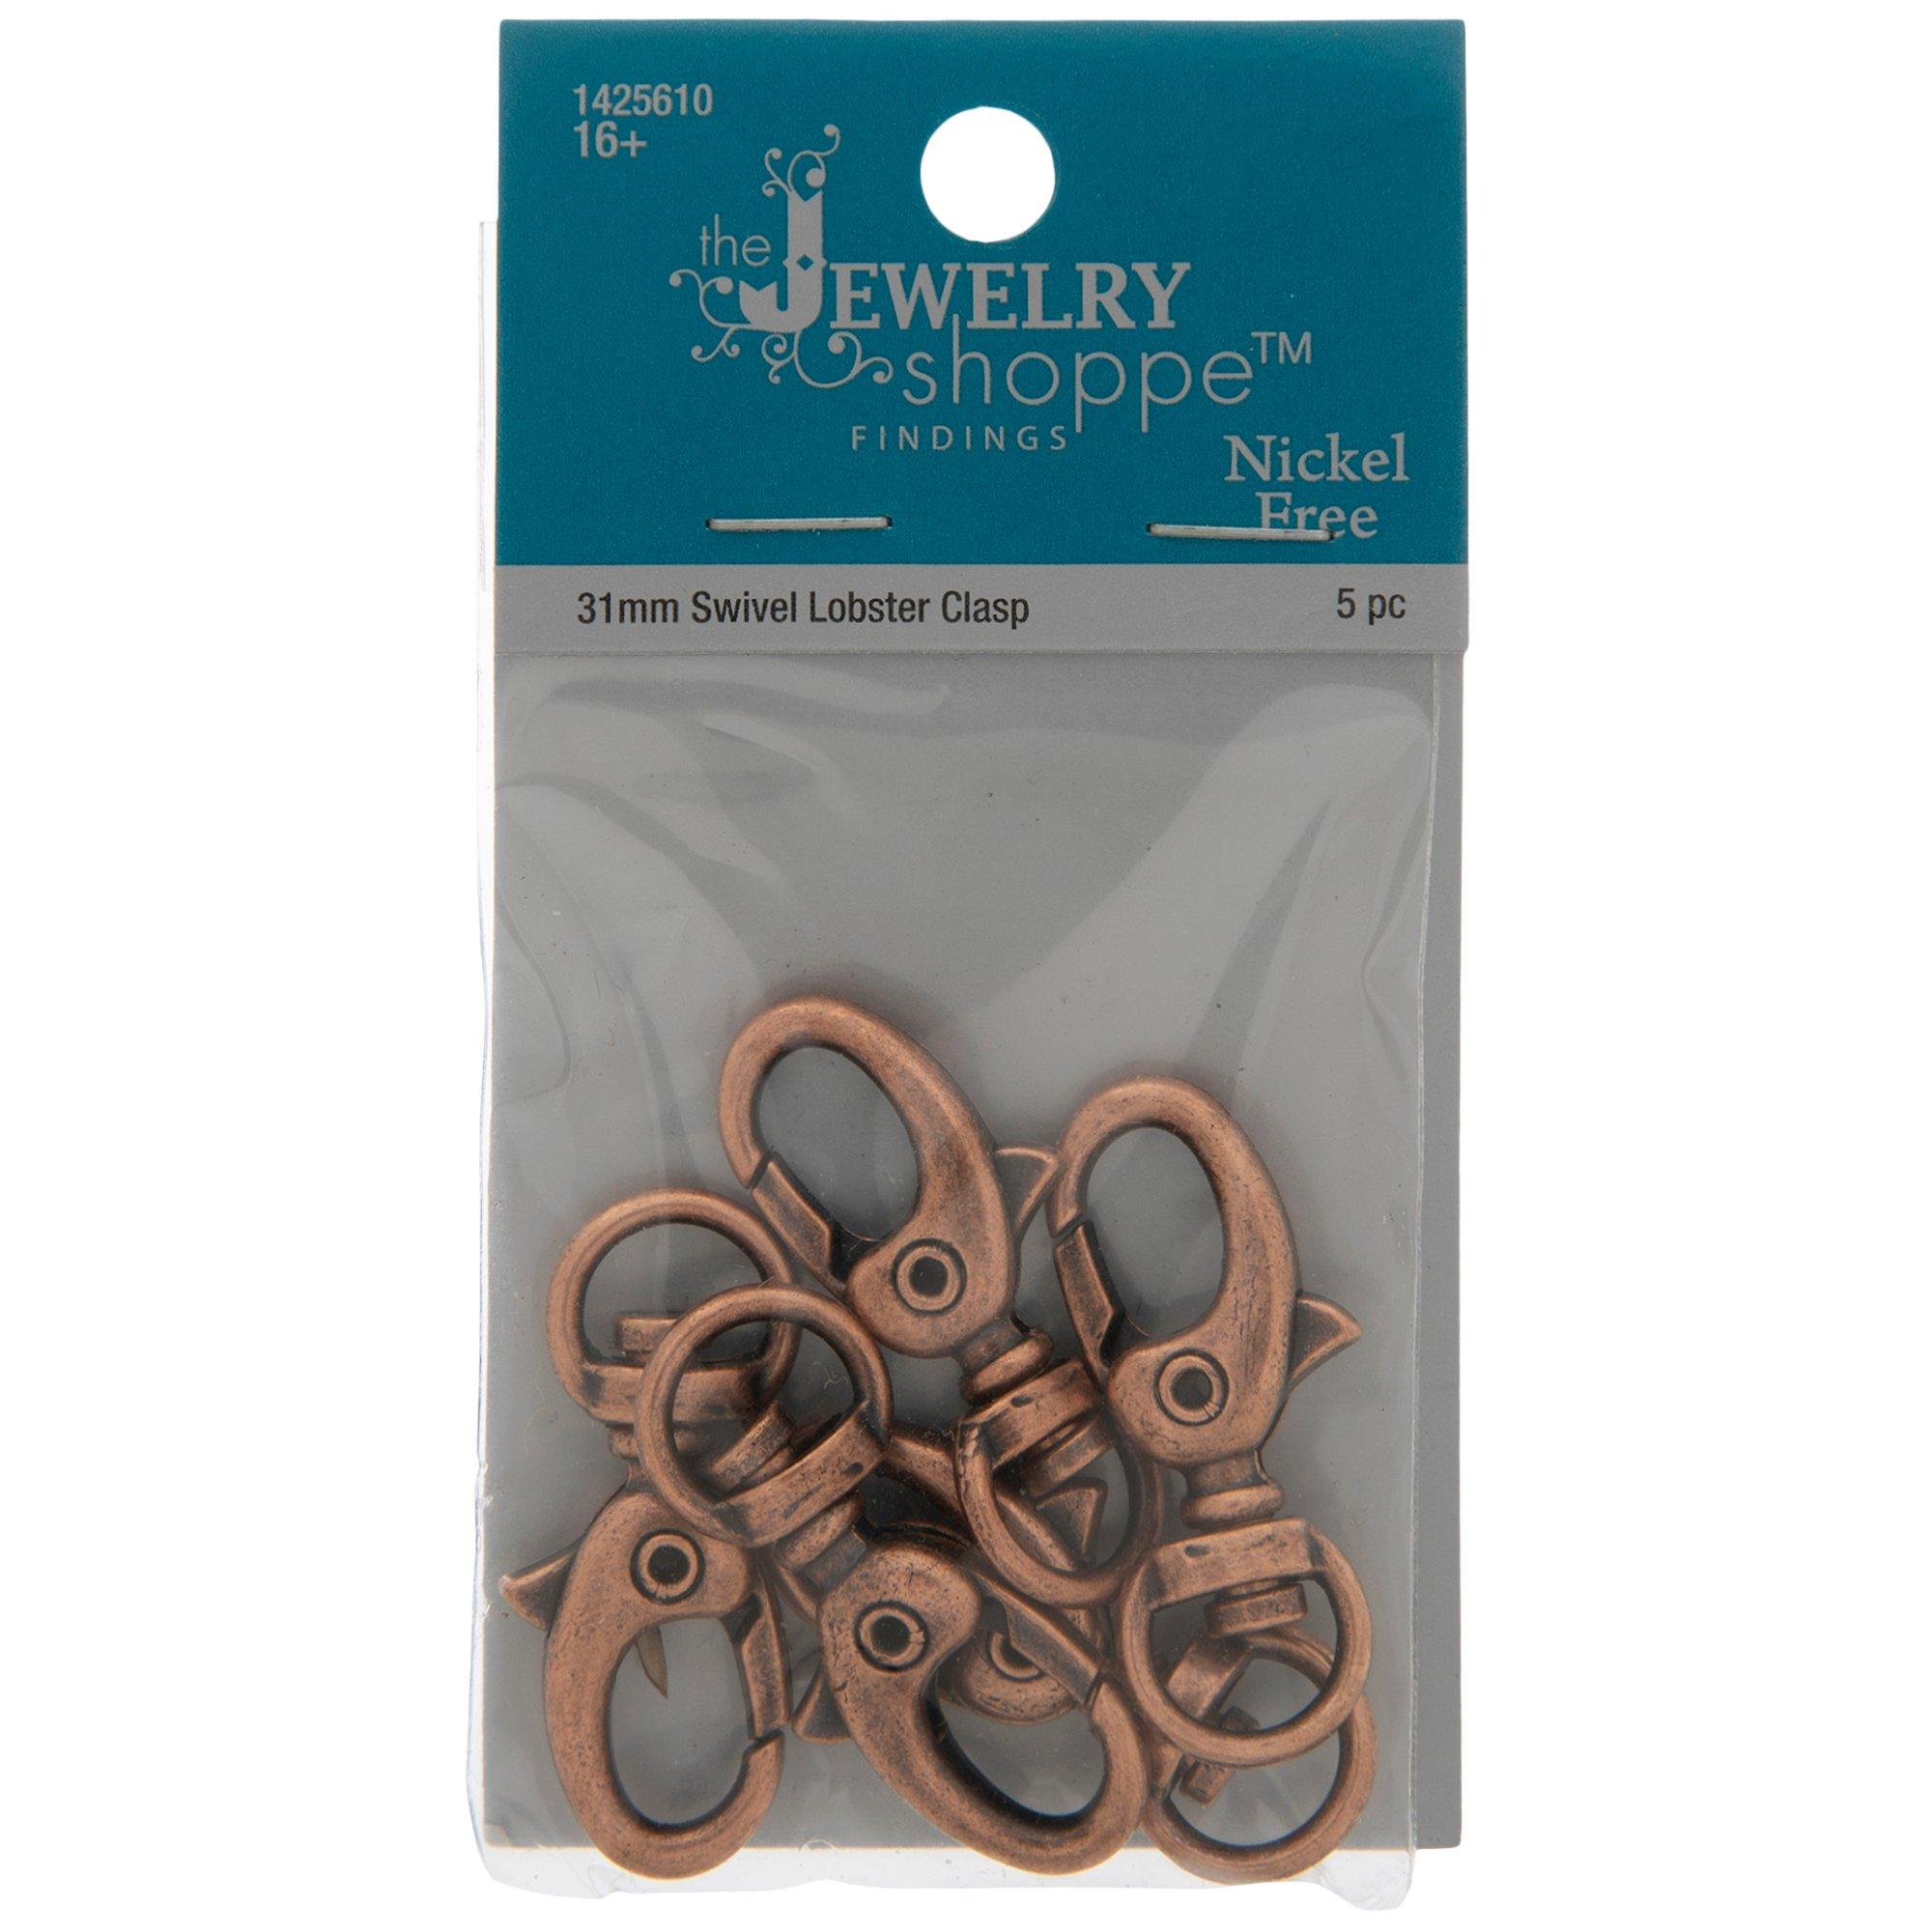 Swivel lobster clasp (2 pack) in various sizes/colors * Idleblooms